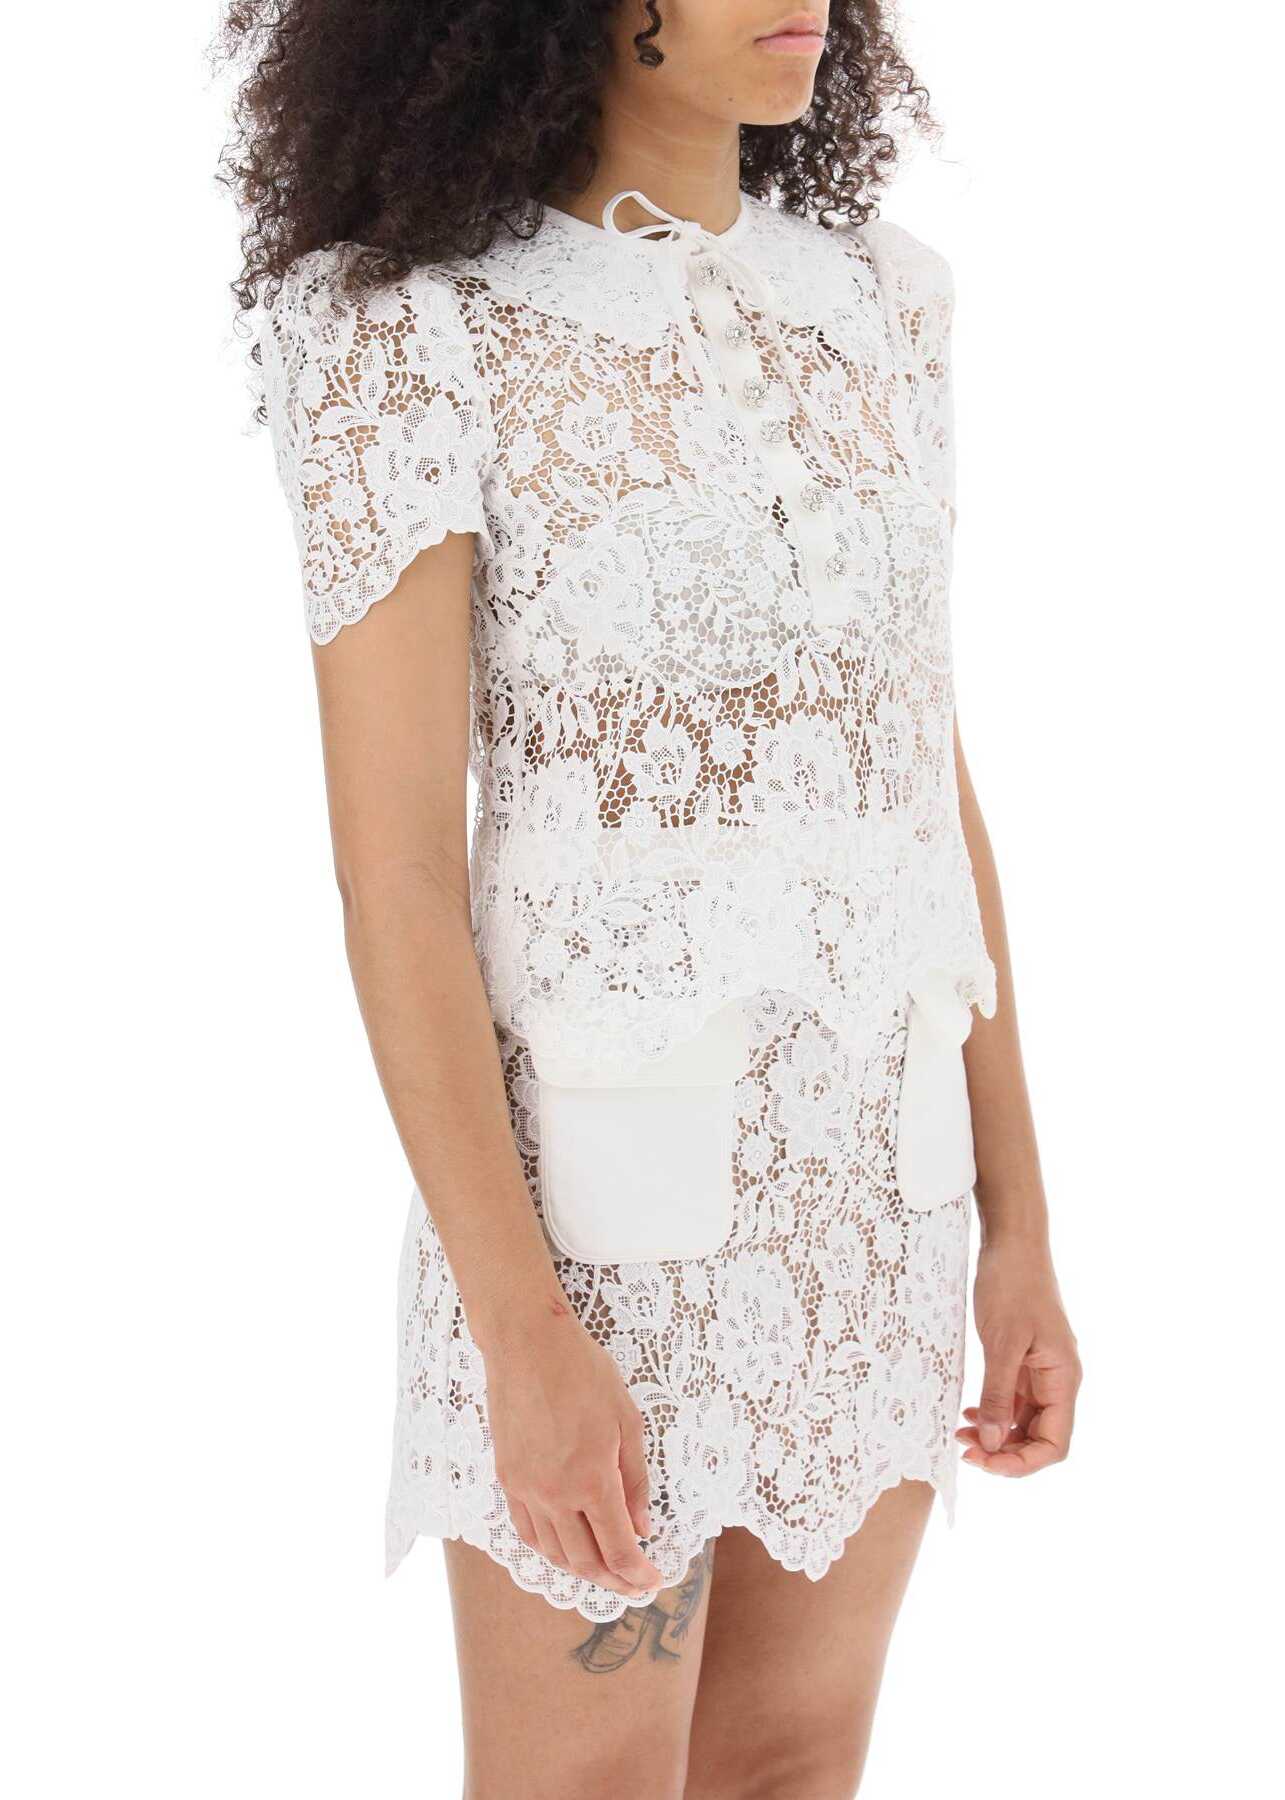 Self-Portrait Short-Sleeved Top In Floral Lace WHITE image5